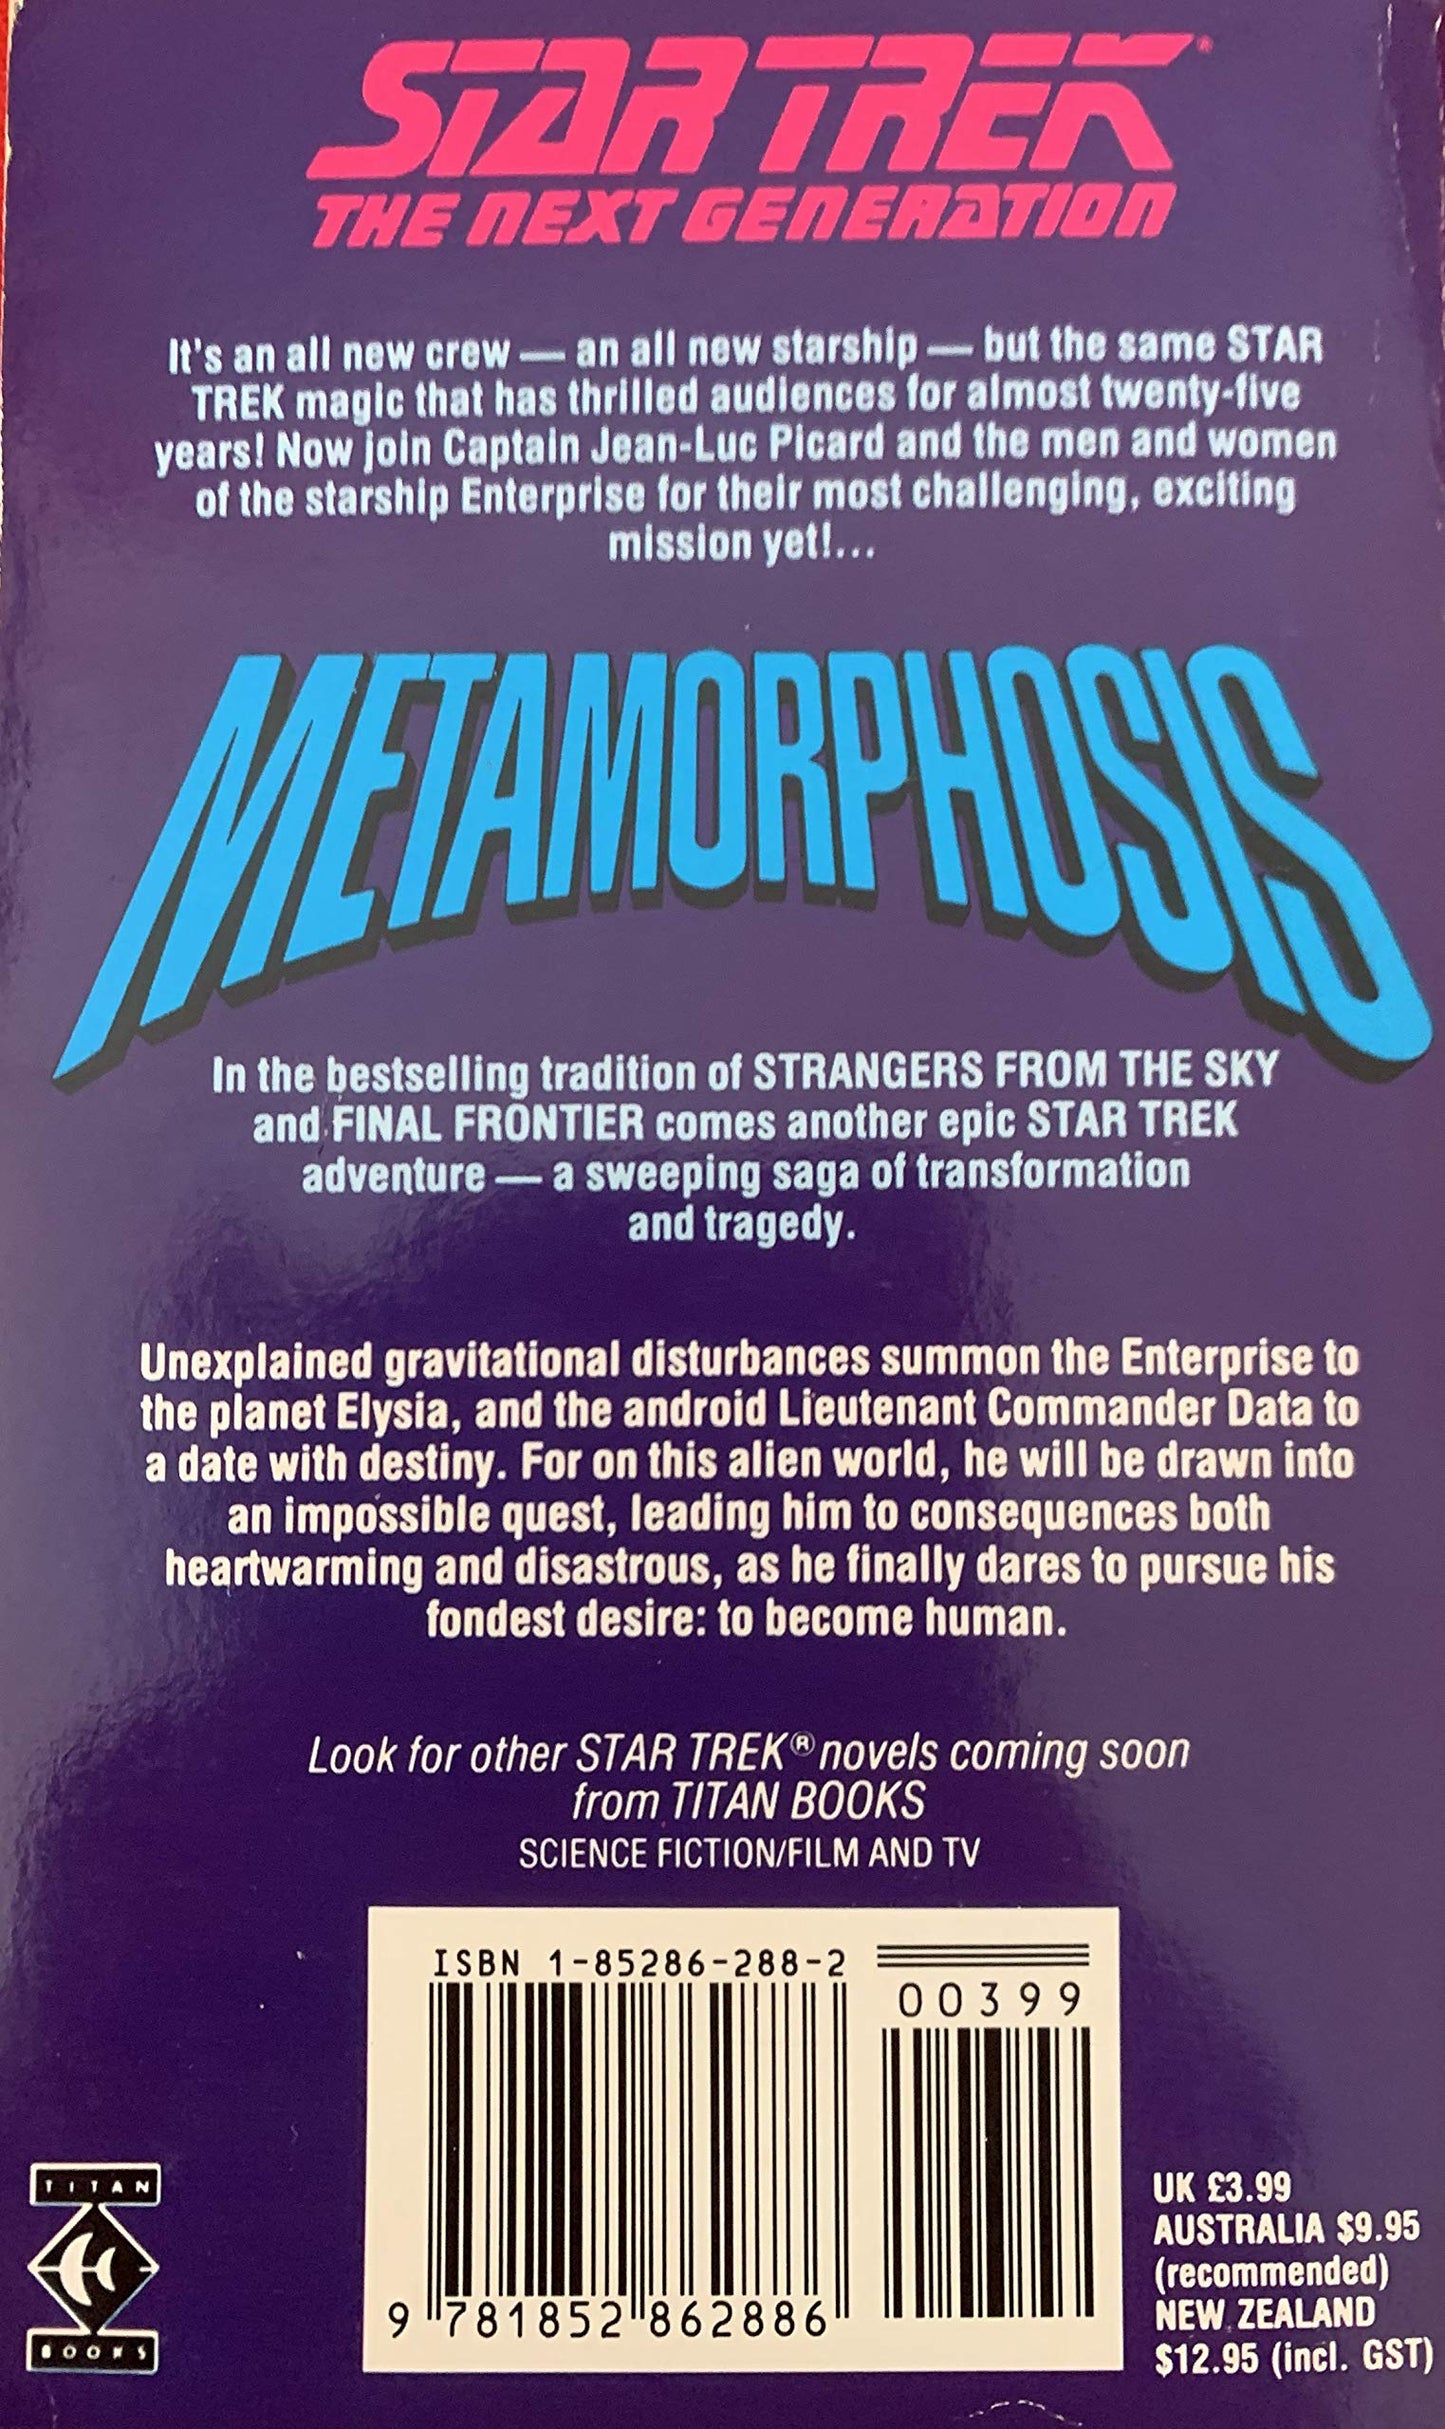 Vintage 1990 Star Trek The Next Generation Metamorphosis Paperback Book First Giant Novel - Autographed by Jean Lorrah The Author